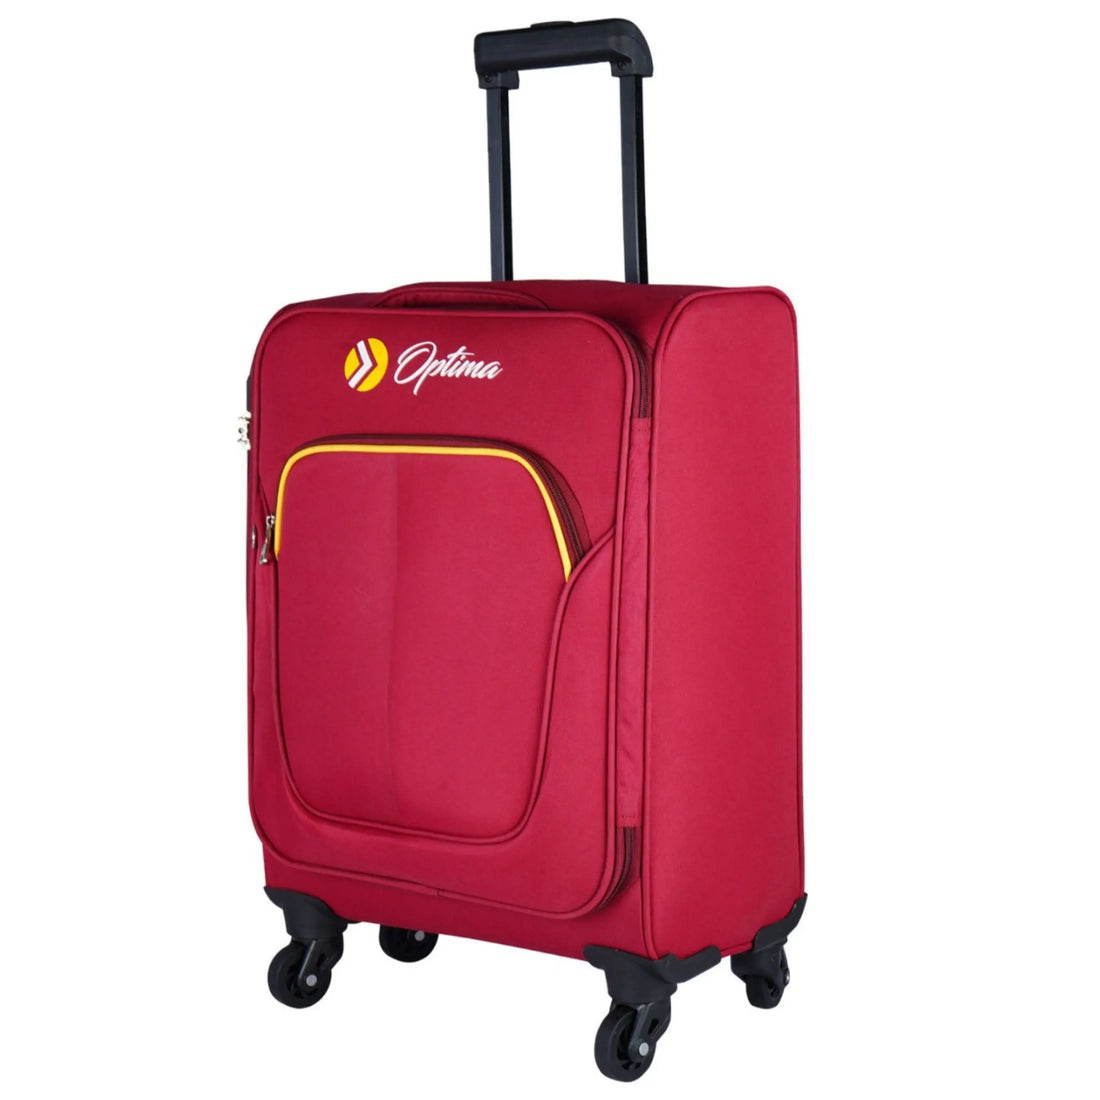 Why-you-need-a-Strong-Sturdy-Trolley-for-your-travel Optima Inc